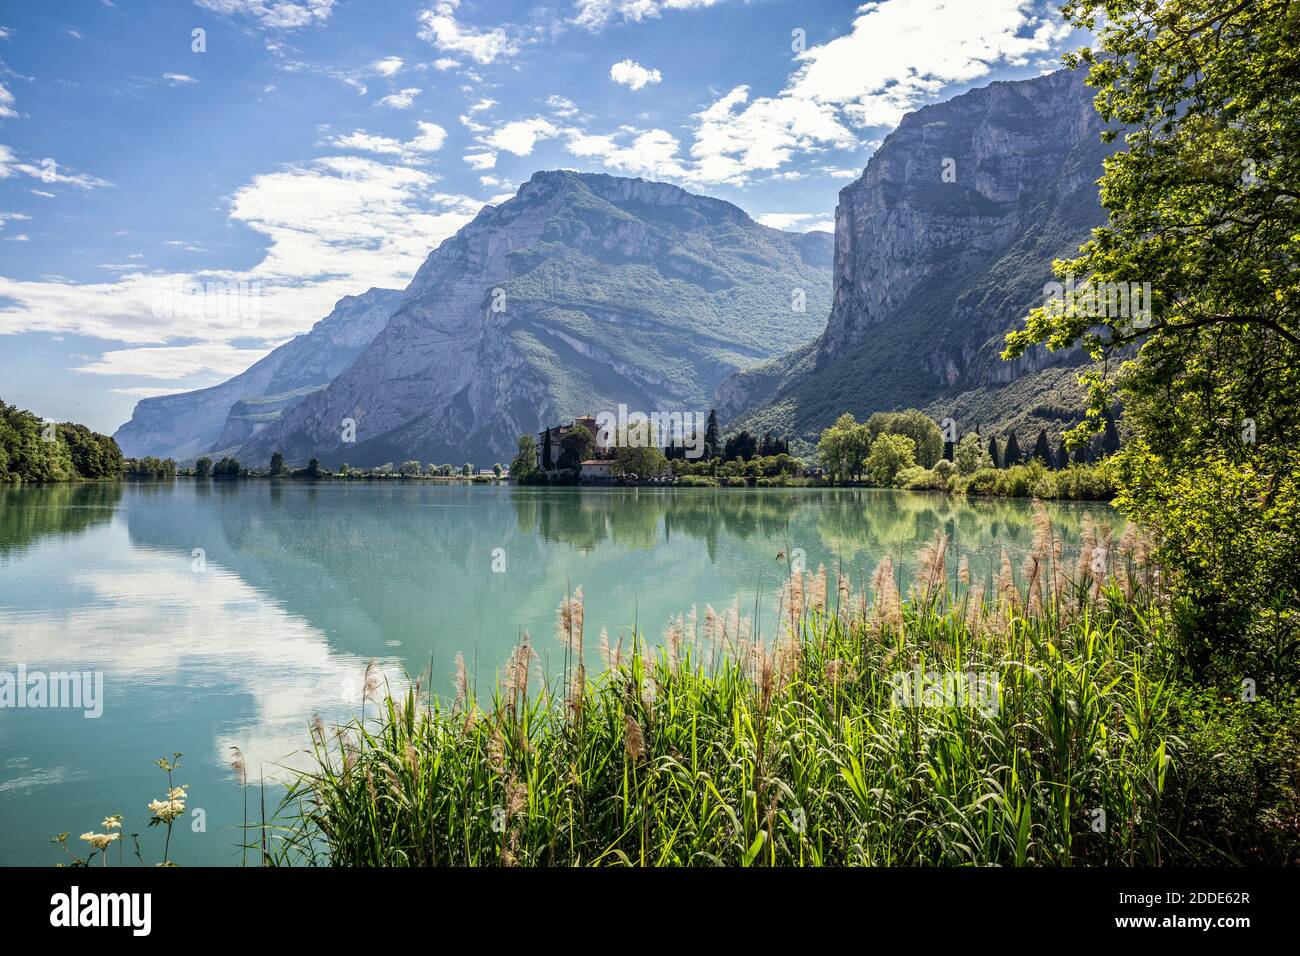 Italy, Trentino, Reeds growing on shore of Lago di Toblino in summer with Castel Toblino in background Stock Photo